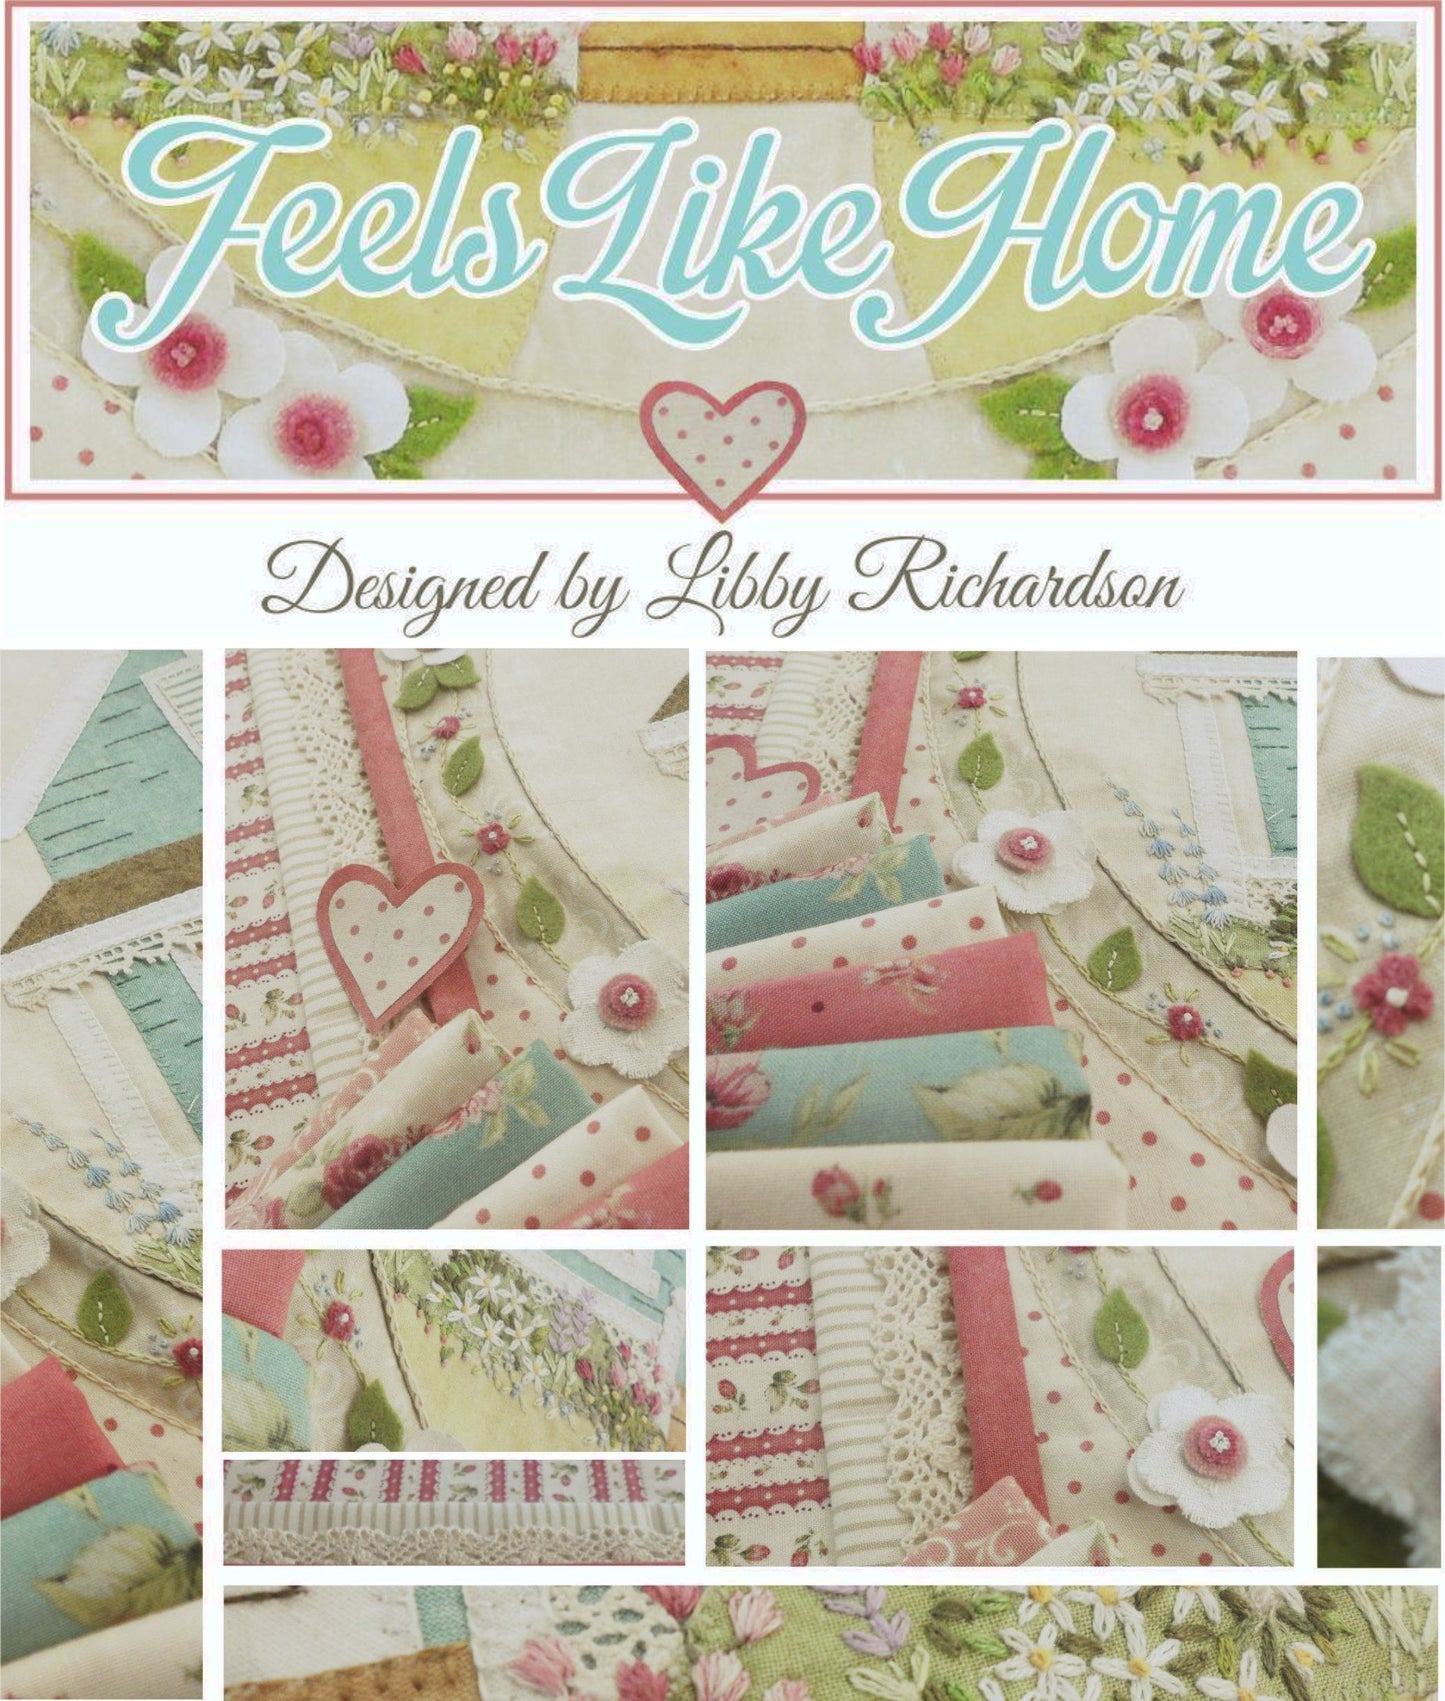 Feels Like Home full fabric kit and patterns.